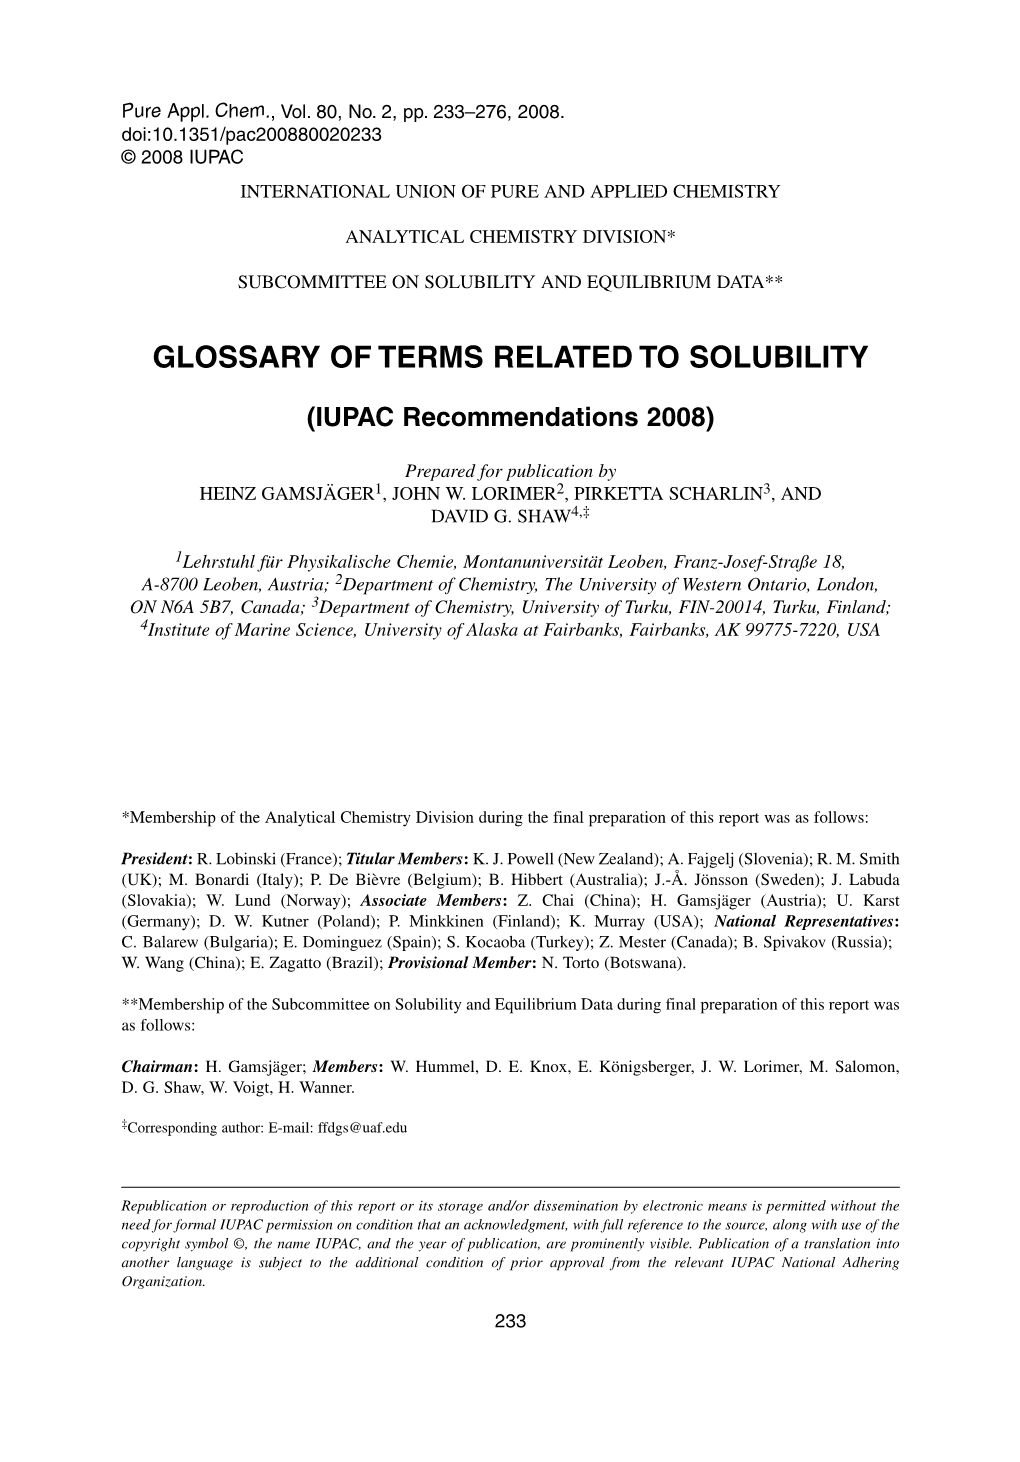 Glossary of Terms Related to Solubility (IUPAC Recommendations 2008)